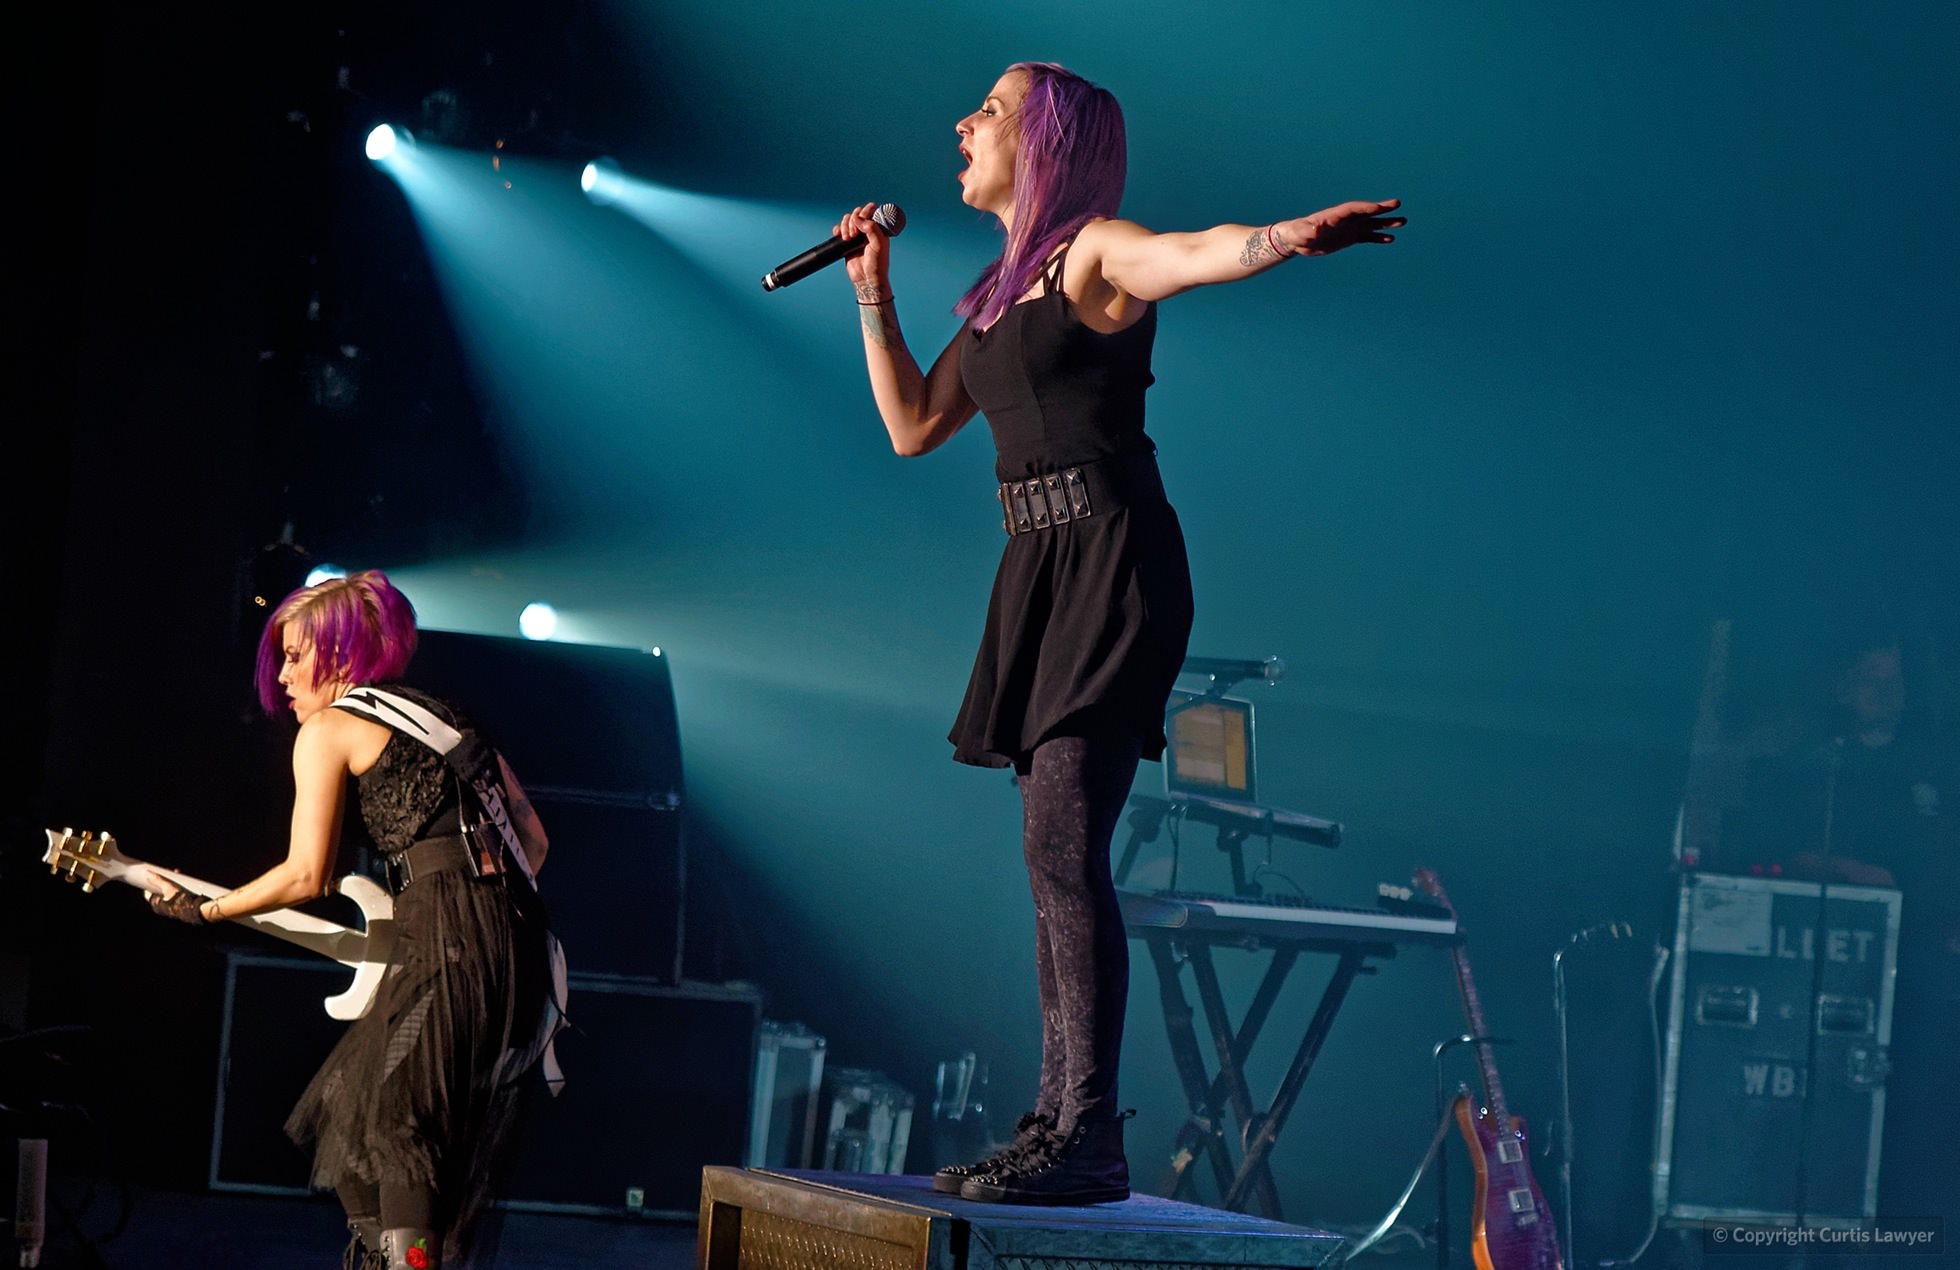 Jen Ledger is so hard to get a great photo of, but this comes pretty close